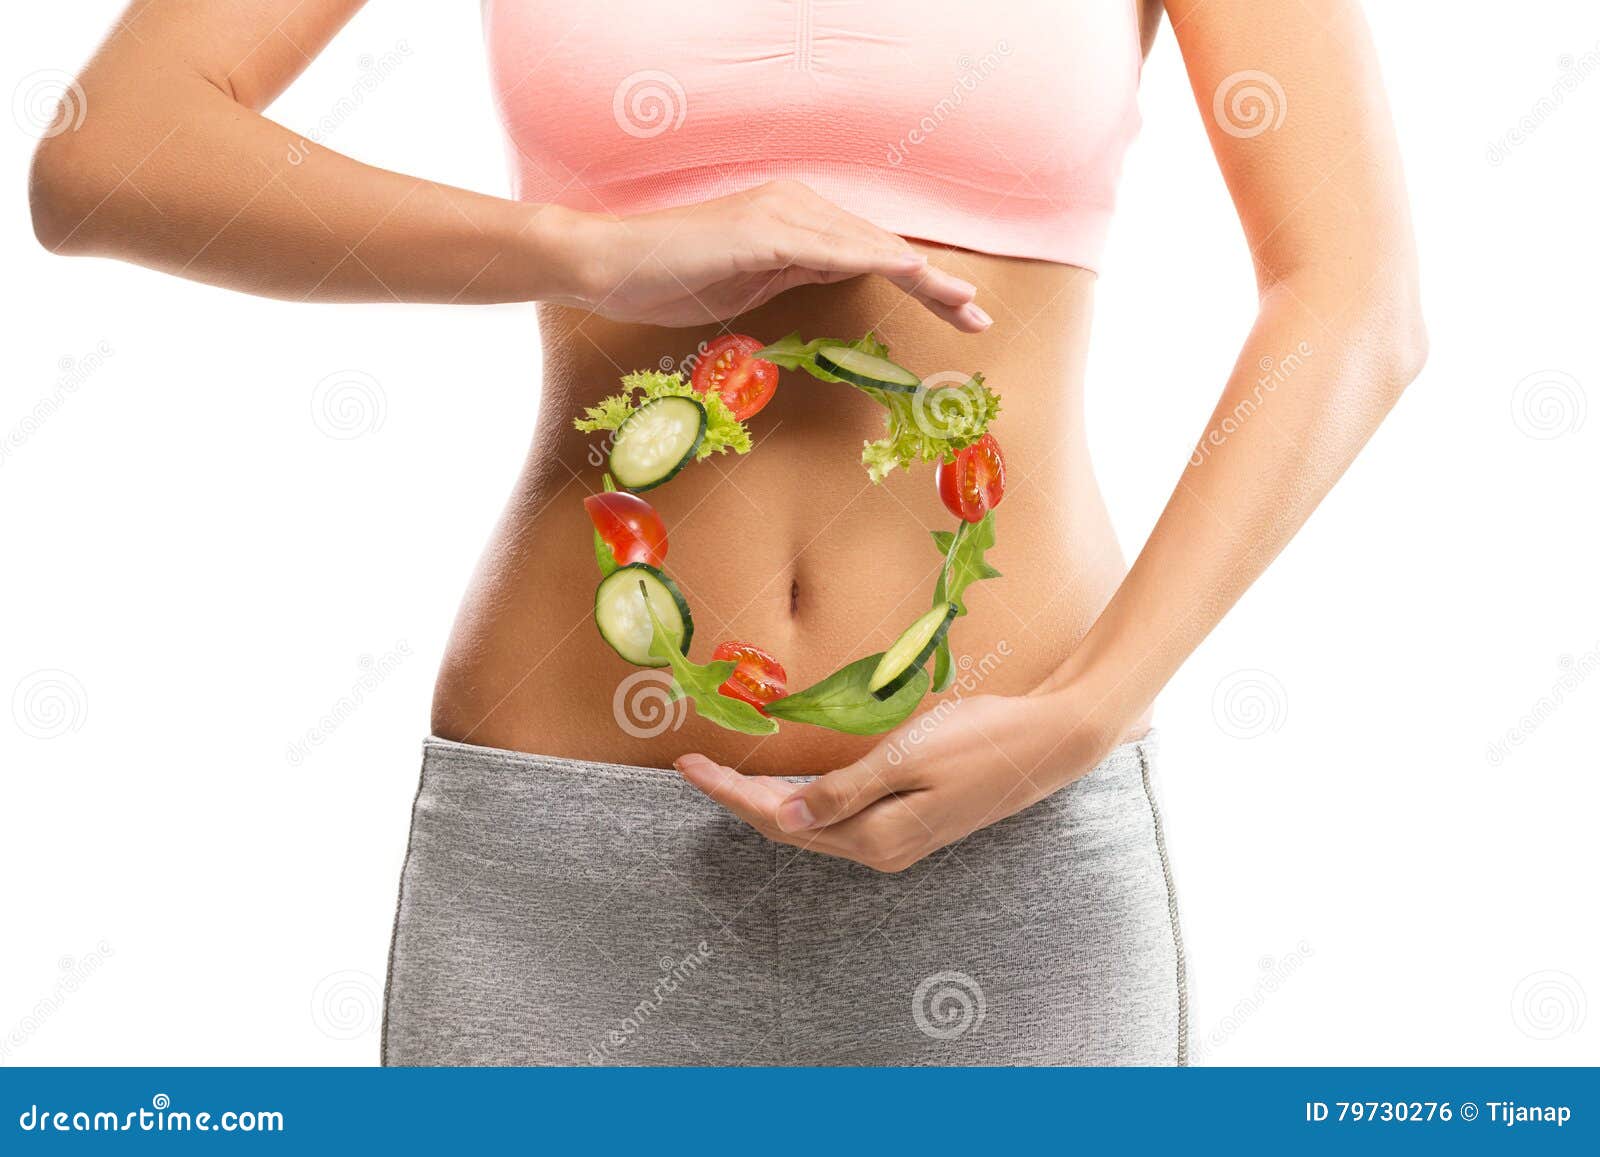 fit, young woman holding a circle made out of vegetables